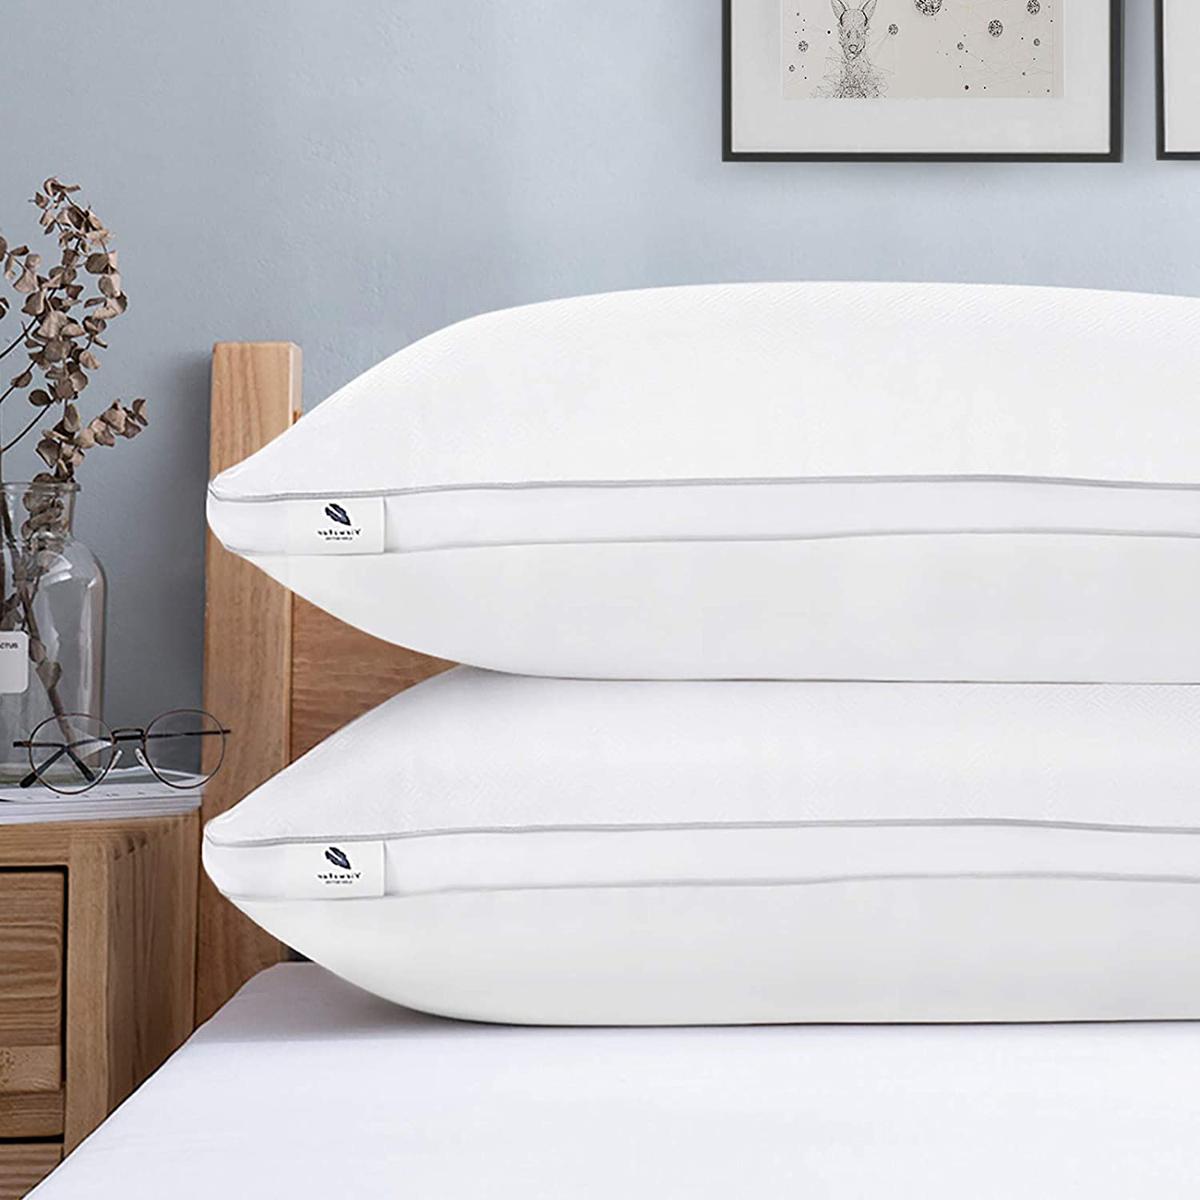 2 viewstar King Size Bed Pillows for $34.39 Shipped